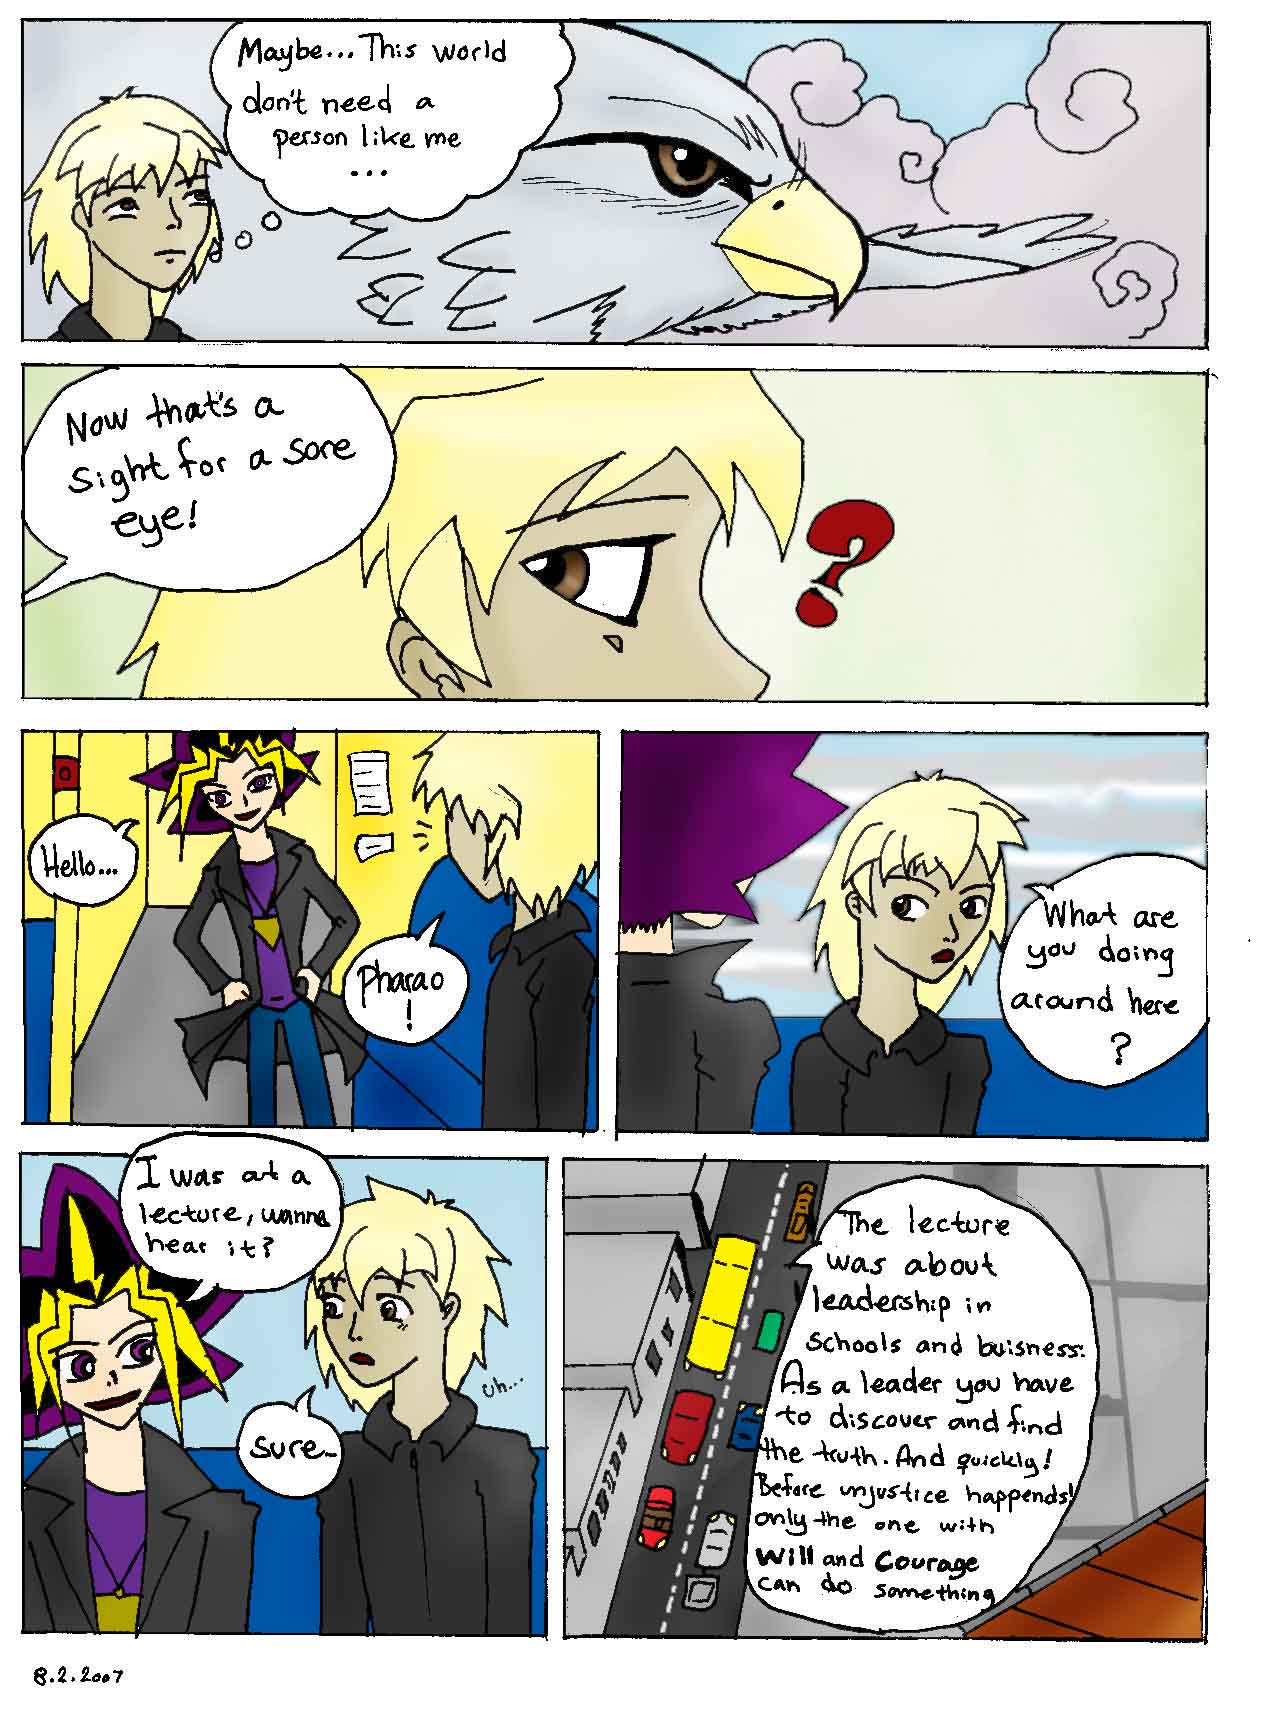 Who am I? Page 6 by Bakura_Angel_of_Light